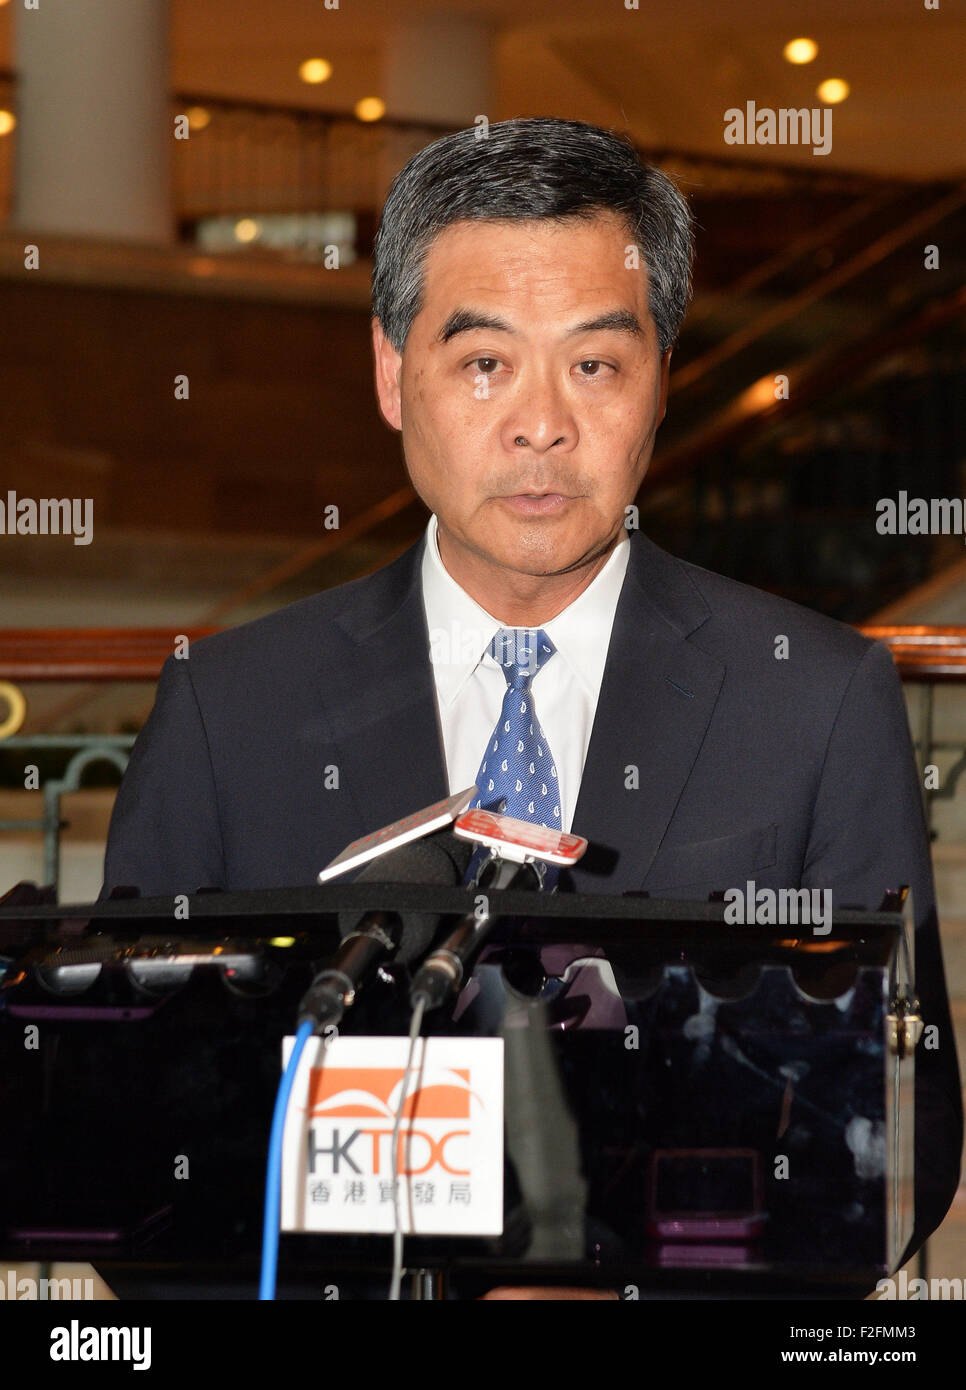 Jakarta, Indonesia. 17th Sep, 2015. China's Hong Kong Special Administrative Region Chief Executive Leung Chun-ying speaks to reporters in Jakarta, capital of Indonesia, Sept. 17, 2015. Leung Chun-ying talked about the economic and trade relations between Hong Kong and the ASEAN. © He Changshan/Xinhua/Alamy Live News Stock Photo